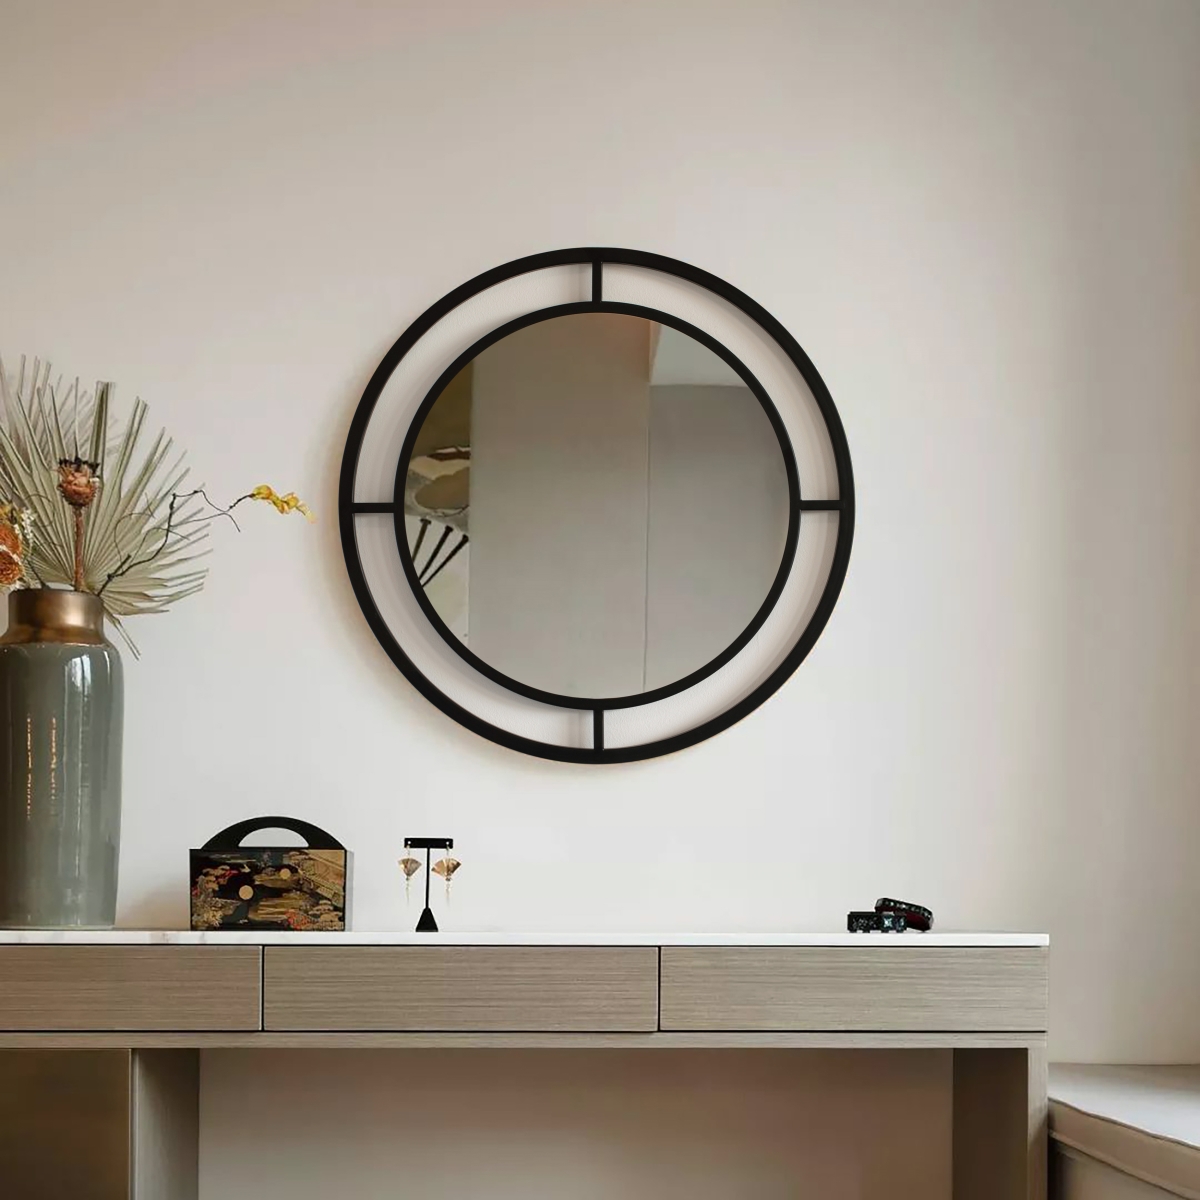 Picture of Uniquewise QI004578 Decorative 19.75-inch Round Mirror with Circle Ring Frame - Black Metal Wall Mounted Modern Mirror for Living Room&#44; Bedroom&#44; Vanity&#44; Entryway&#44; Hallway - Elegant Circle Mirror Design